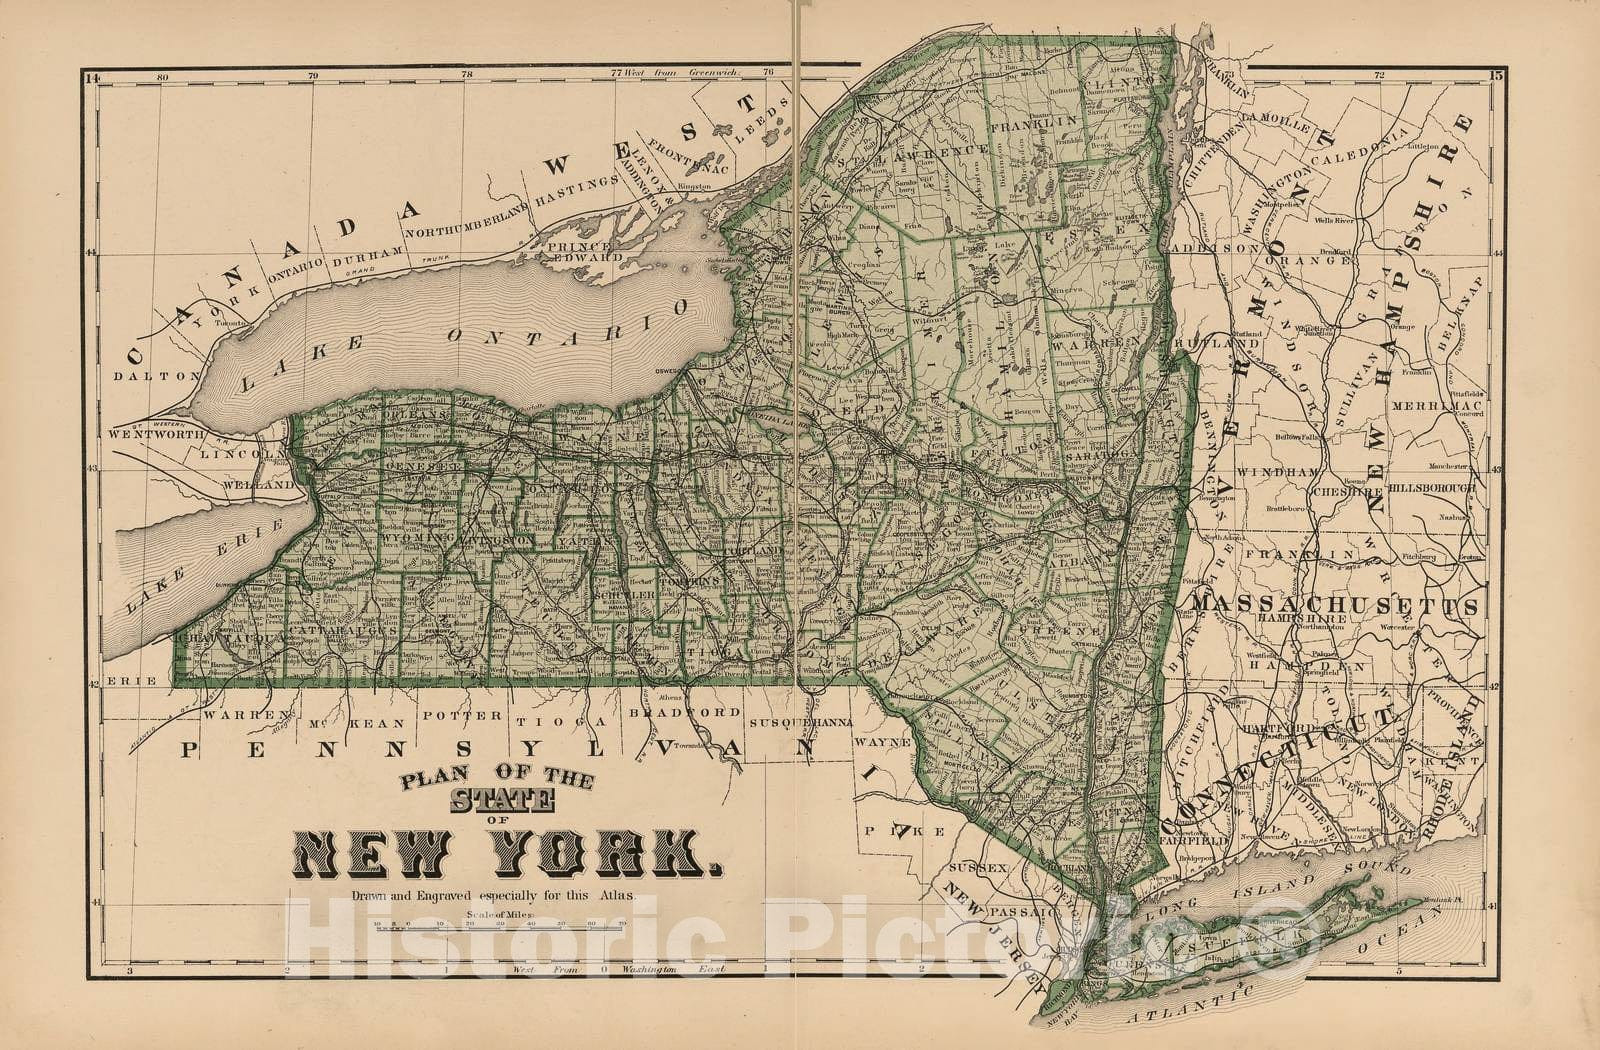 Historic 1875 Map - County Atlas of Sullivan, New York - Plan of The State of New York